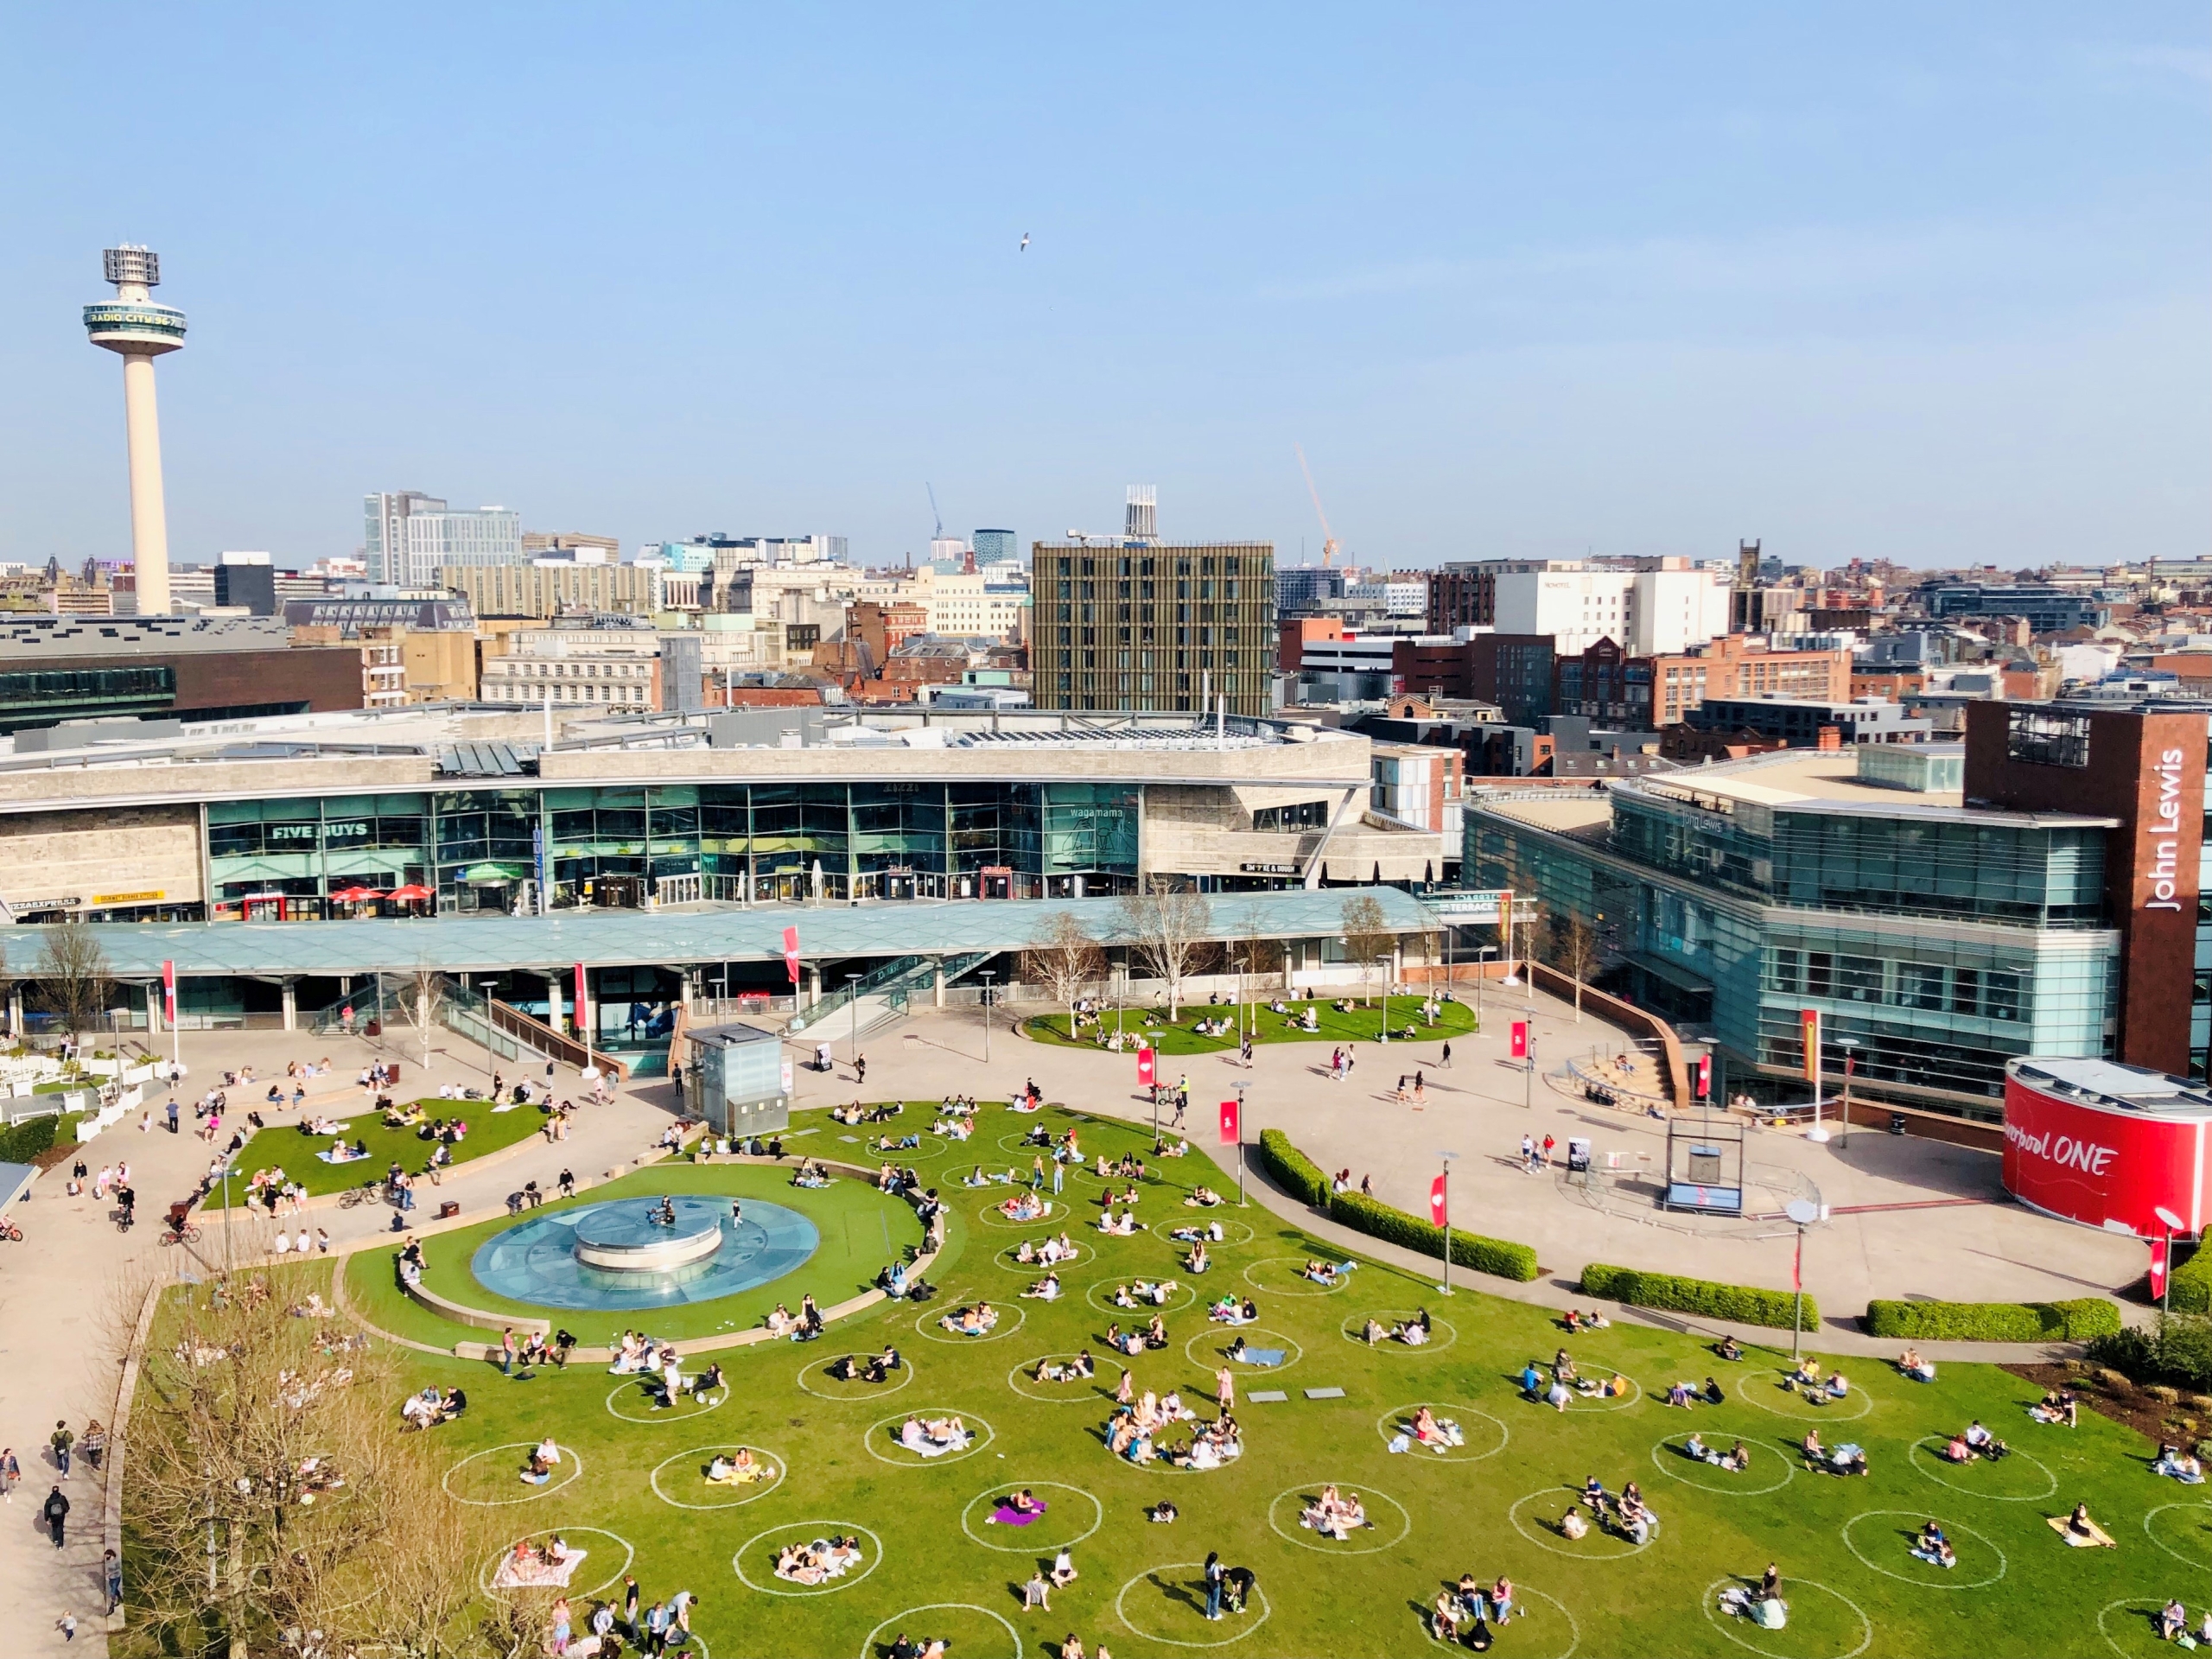 liverpool one chavasse park with distance safe circles drawn on the grass and public among them